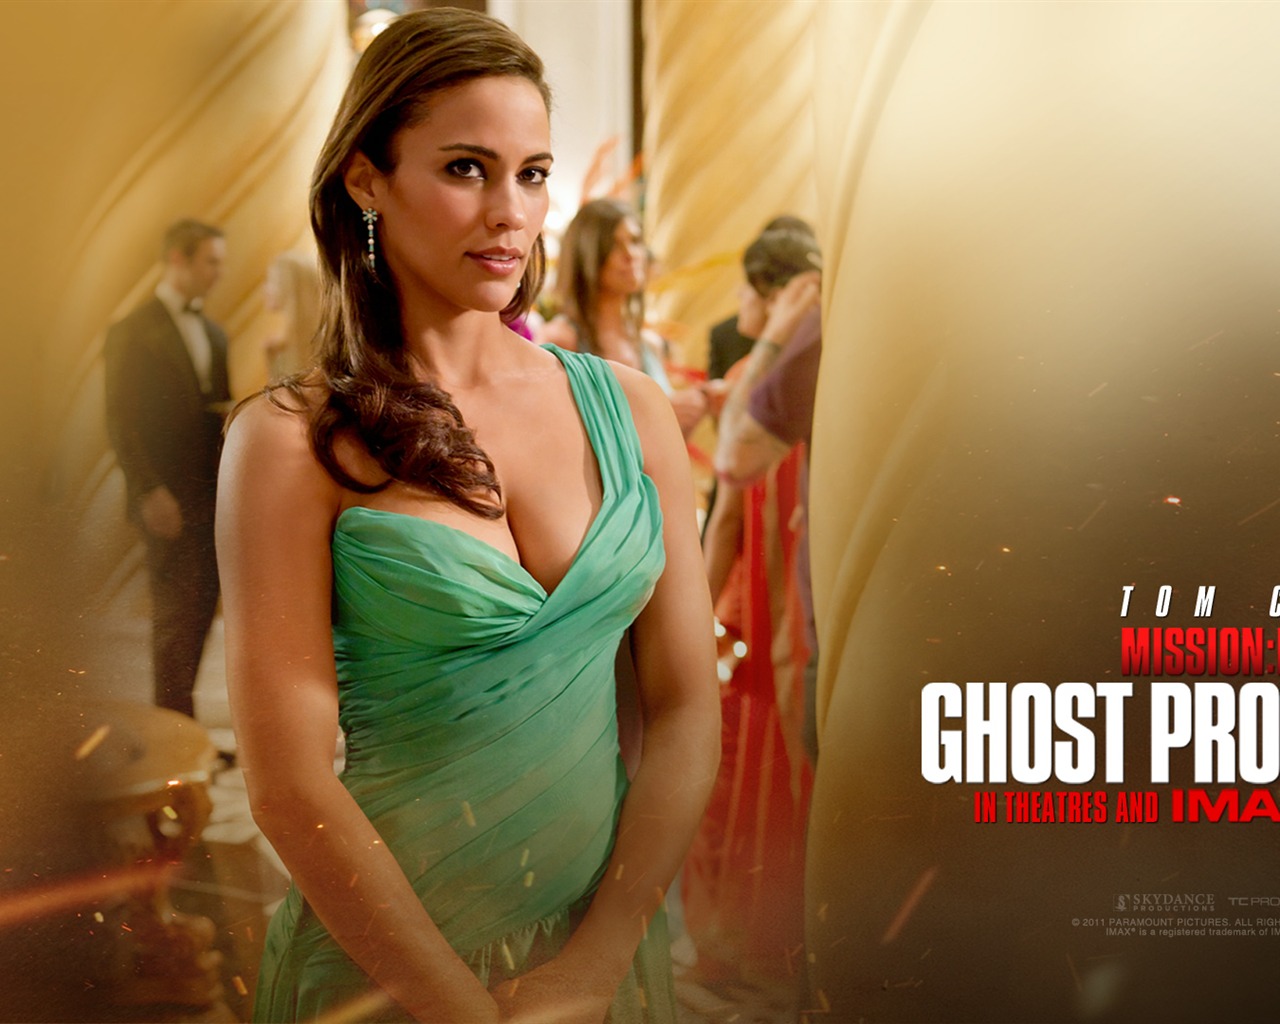 Mission: Impossible - Ghost Protocol HD wallpapers #7 - 1280x1024